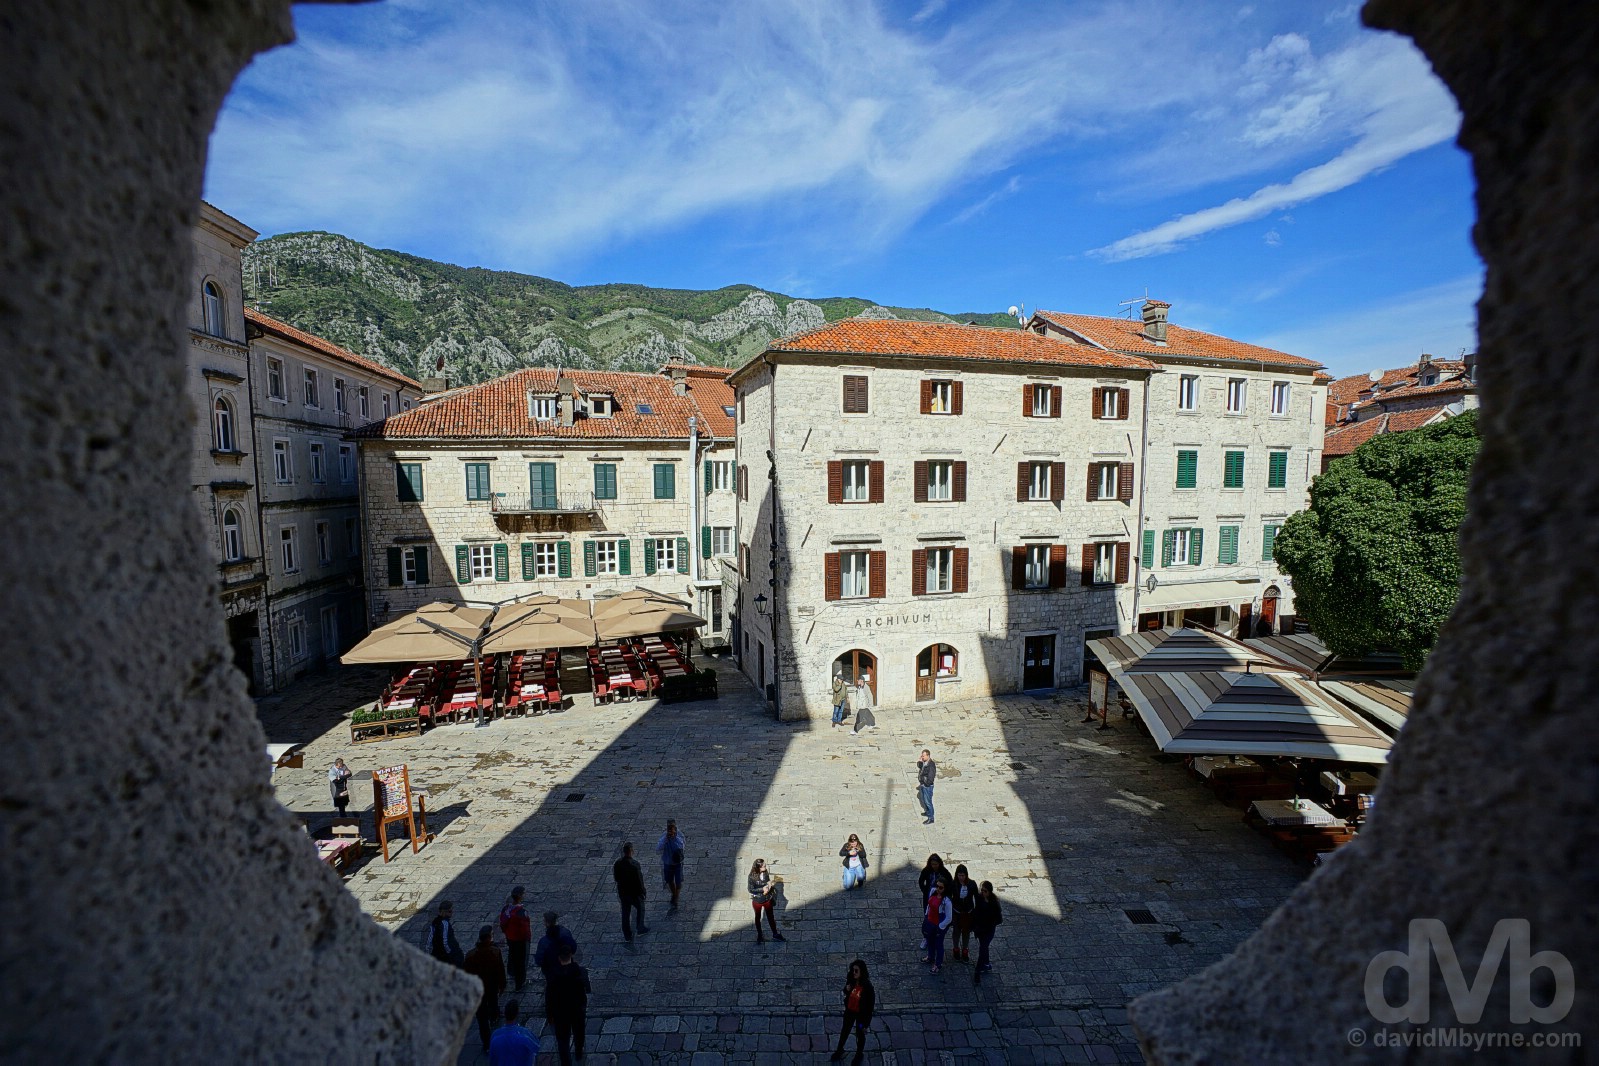 Trg sv. Tripuna (St. Tryphon's Square) as seen from the Cathedral of St. Tryphon, Stari Grad (Old Town), Kotor, Montenegro. April 20, 2017.